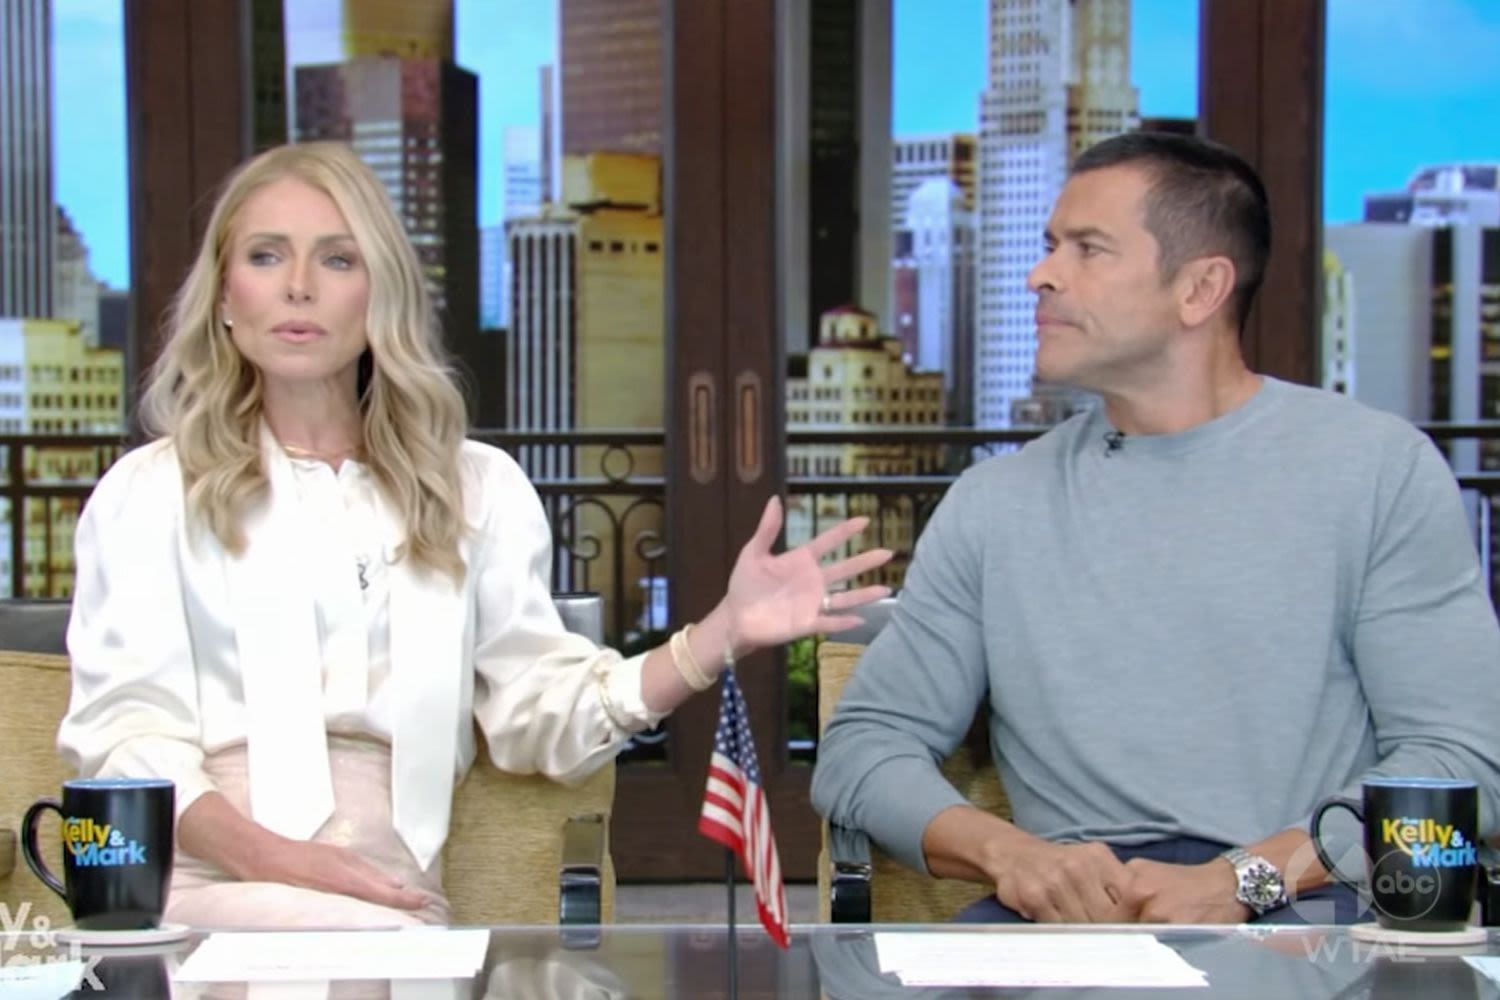 Kelly Ripa references nipples in criticism of Gen Z pimple patch trend: 'A little modesty goes a long way'